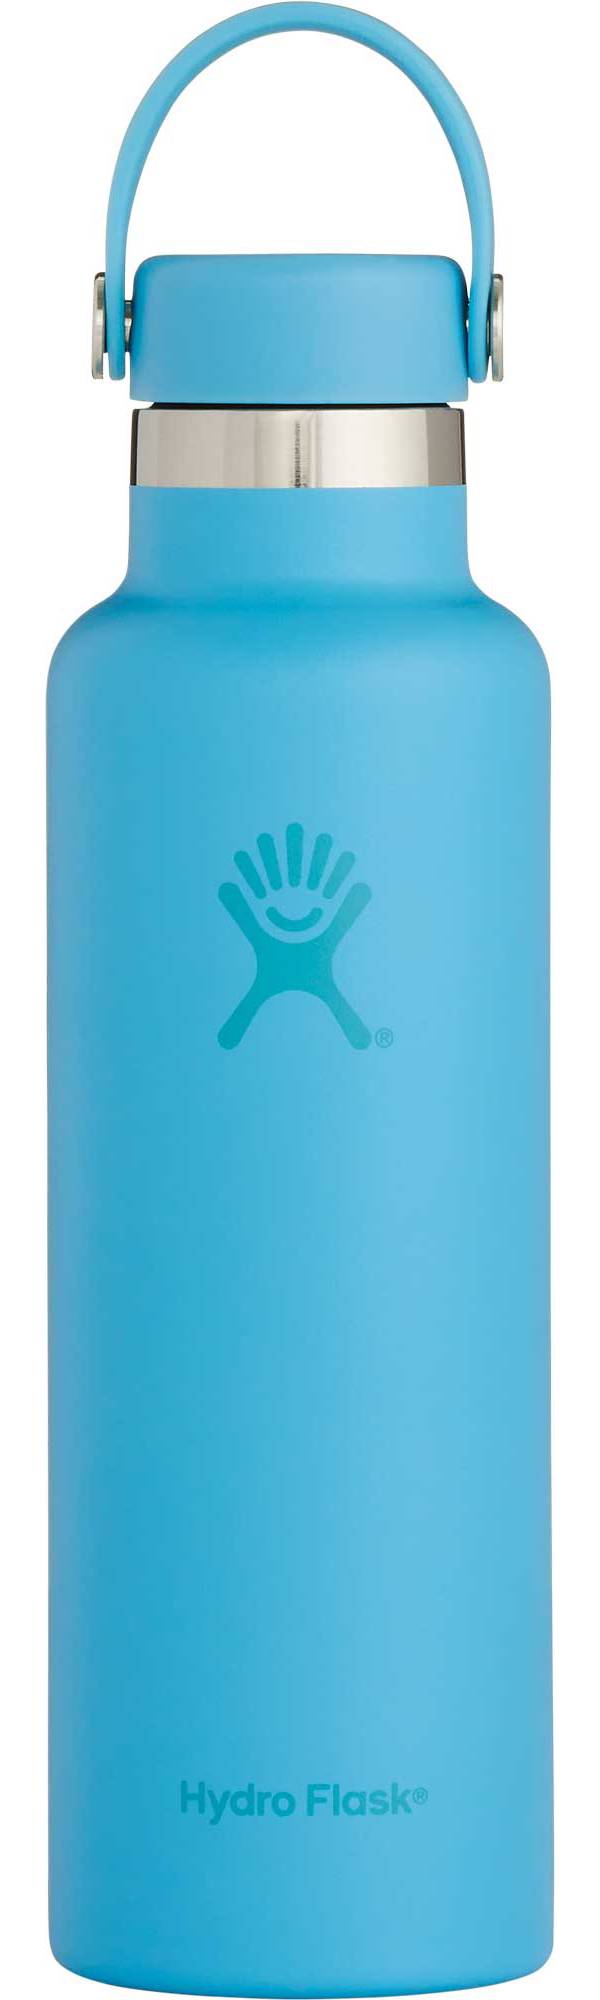 Hydro Flask Skyline Series 21 oz. Standard Mouth Bottle product image